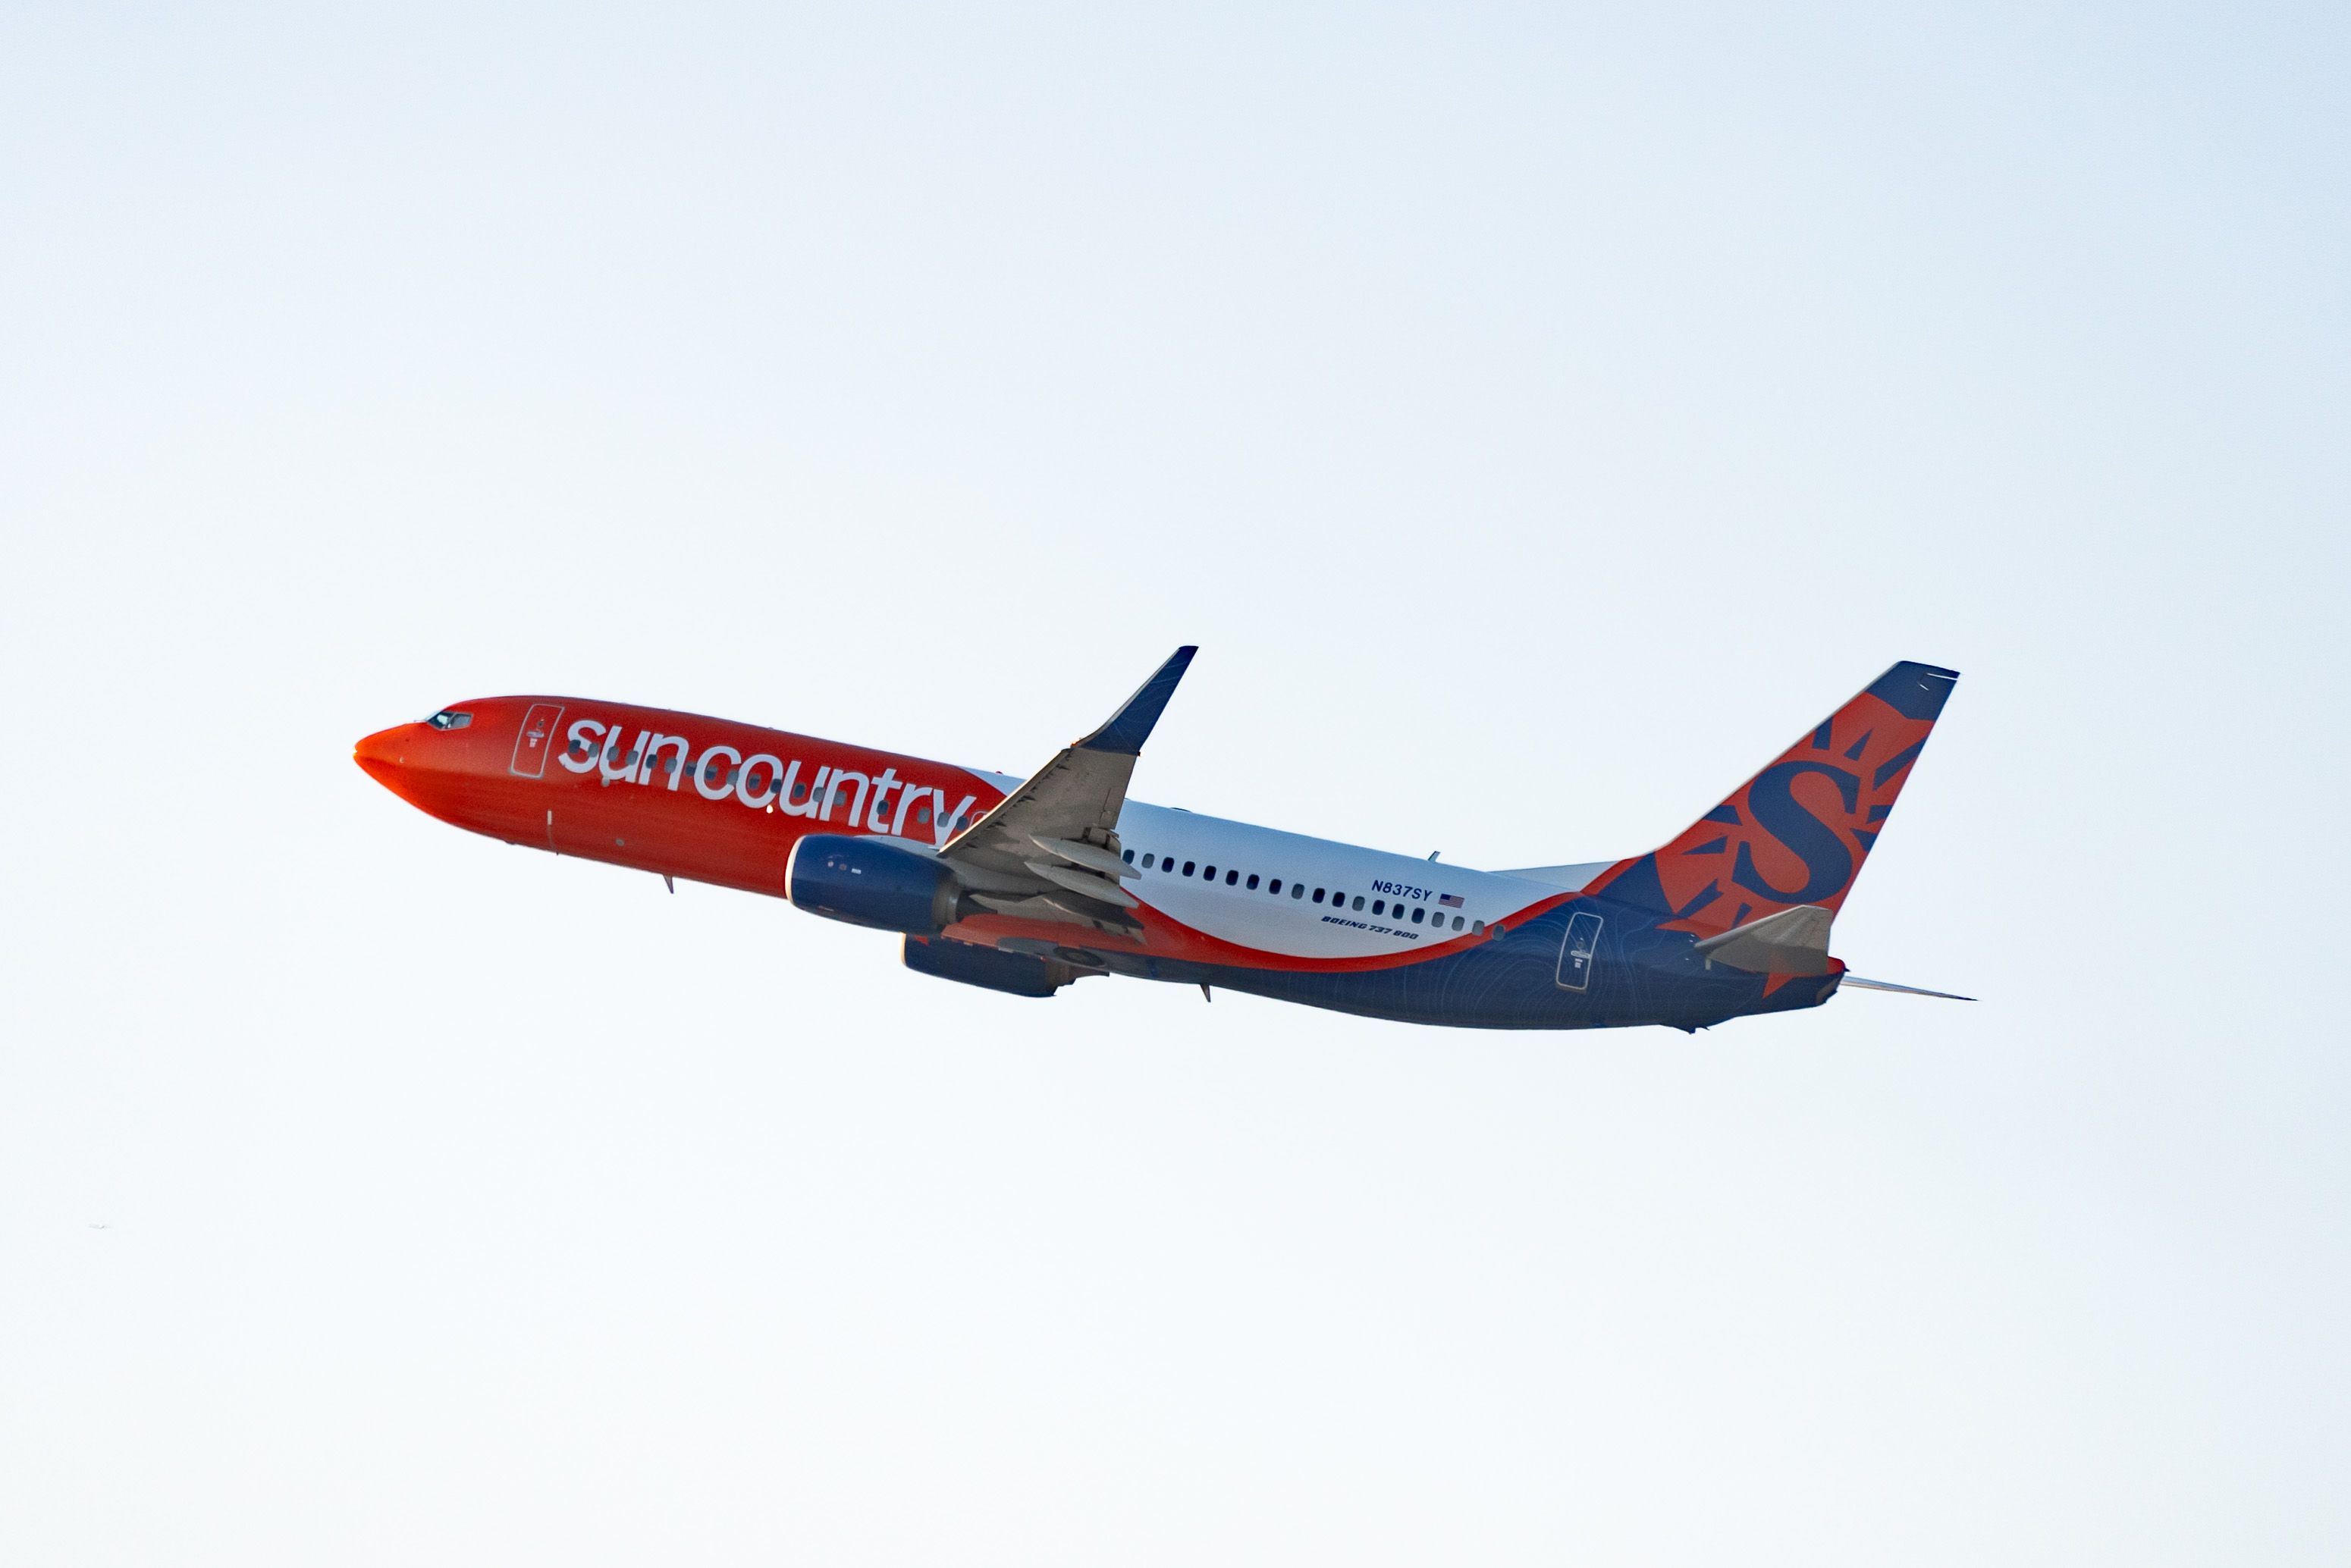 GettyImages-1228234139 - Sun Country Airlines 737 Taking Off